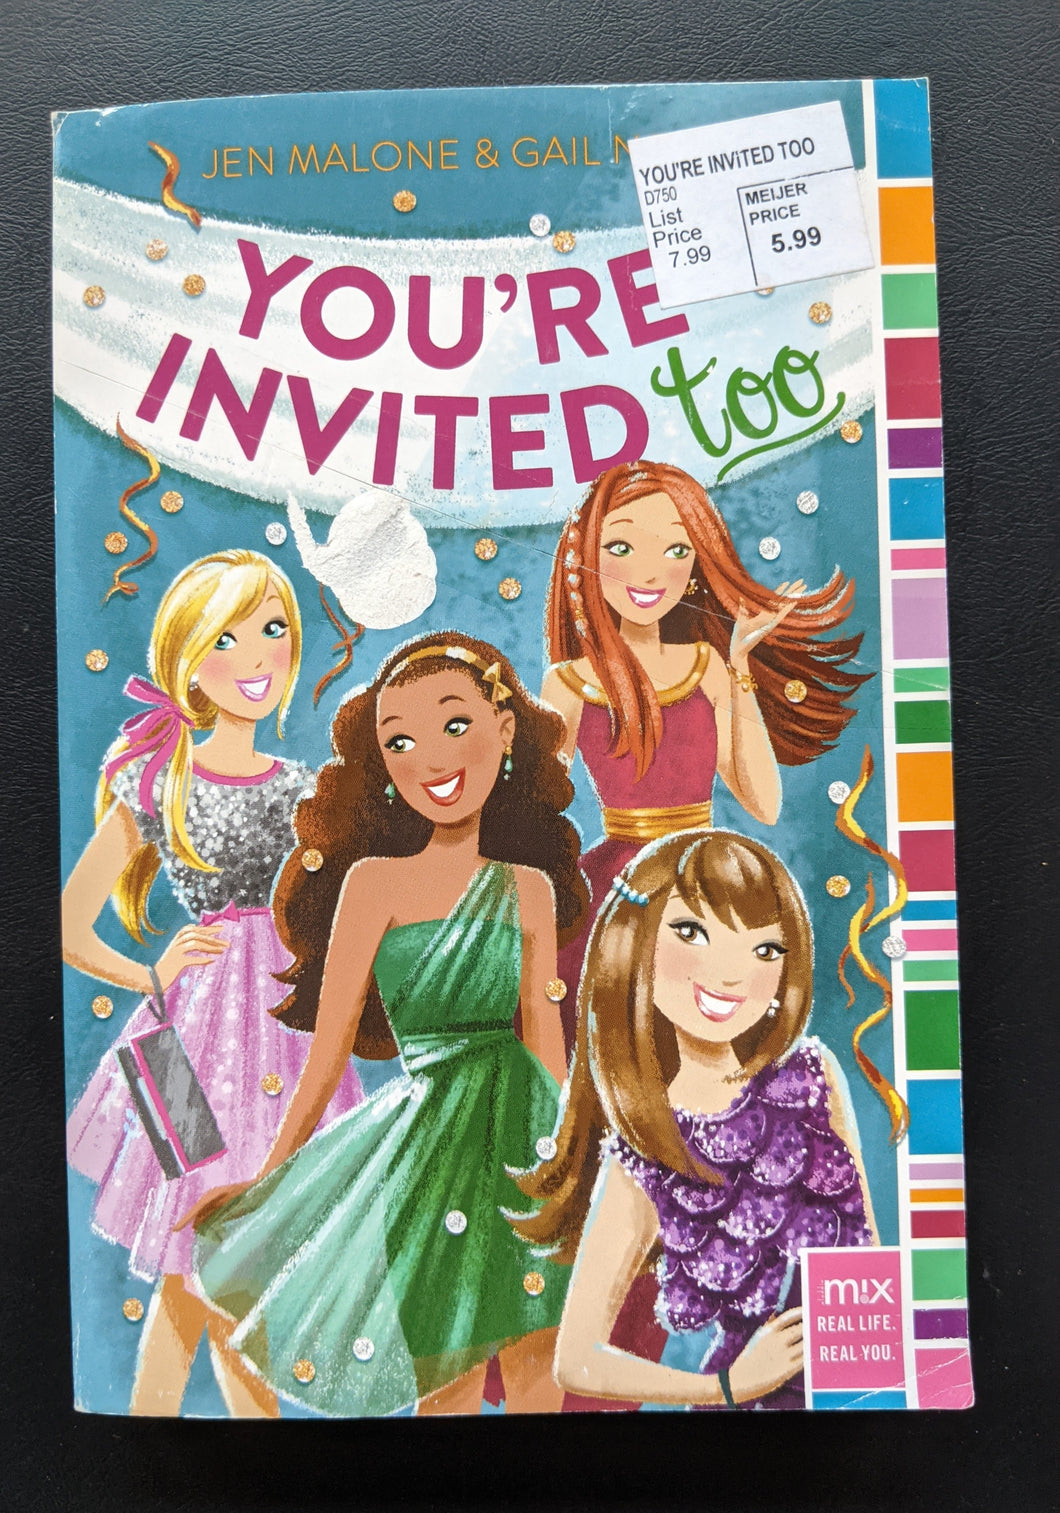 You're Invited Too by Jen Malone and Gail Nall